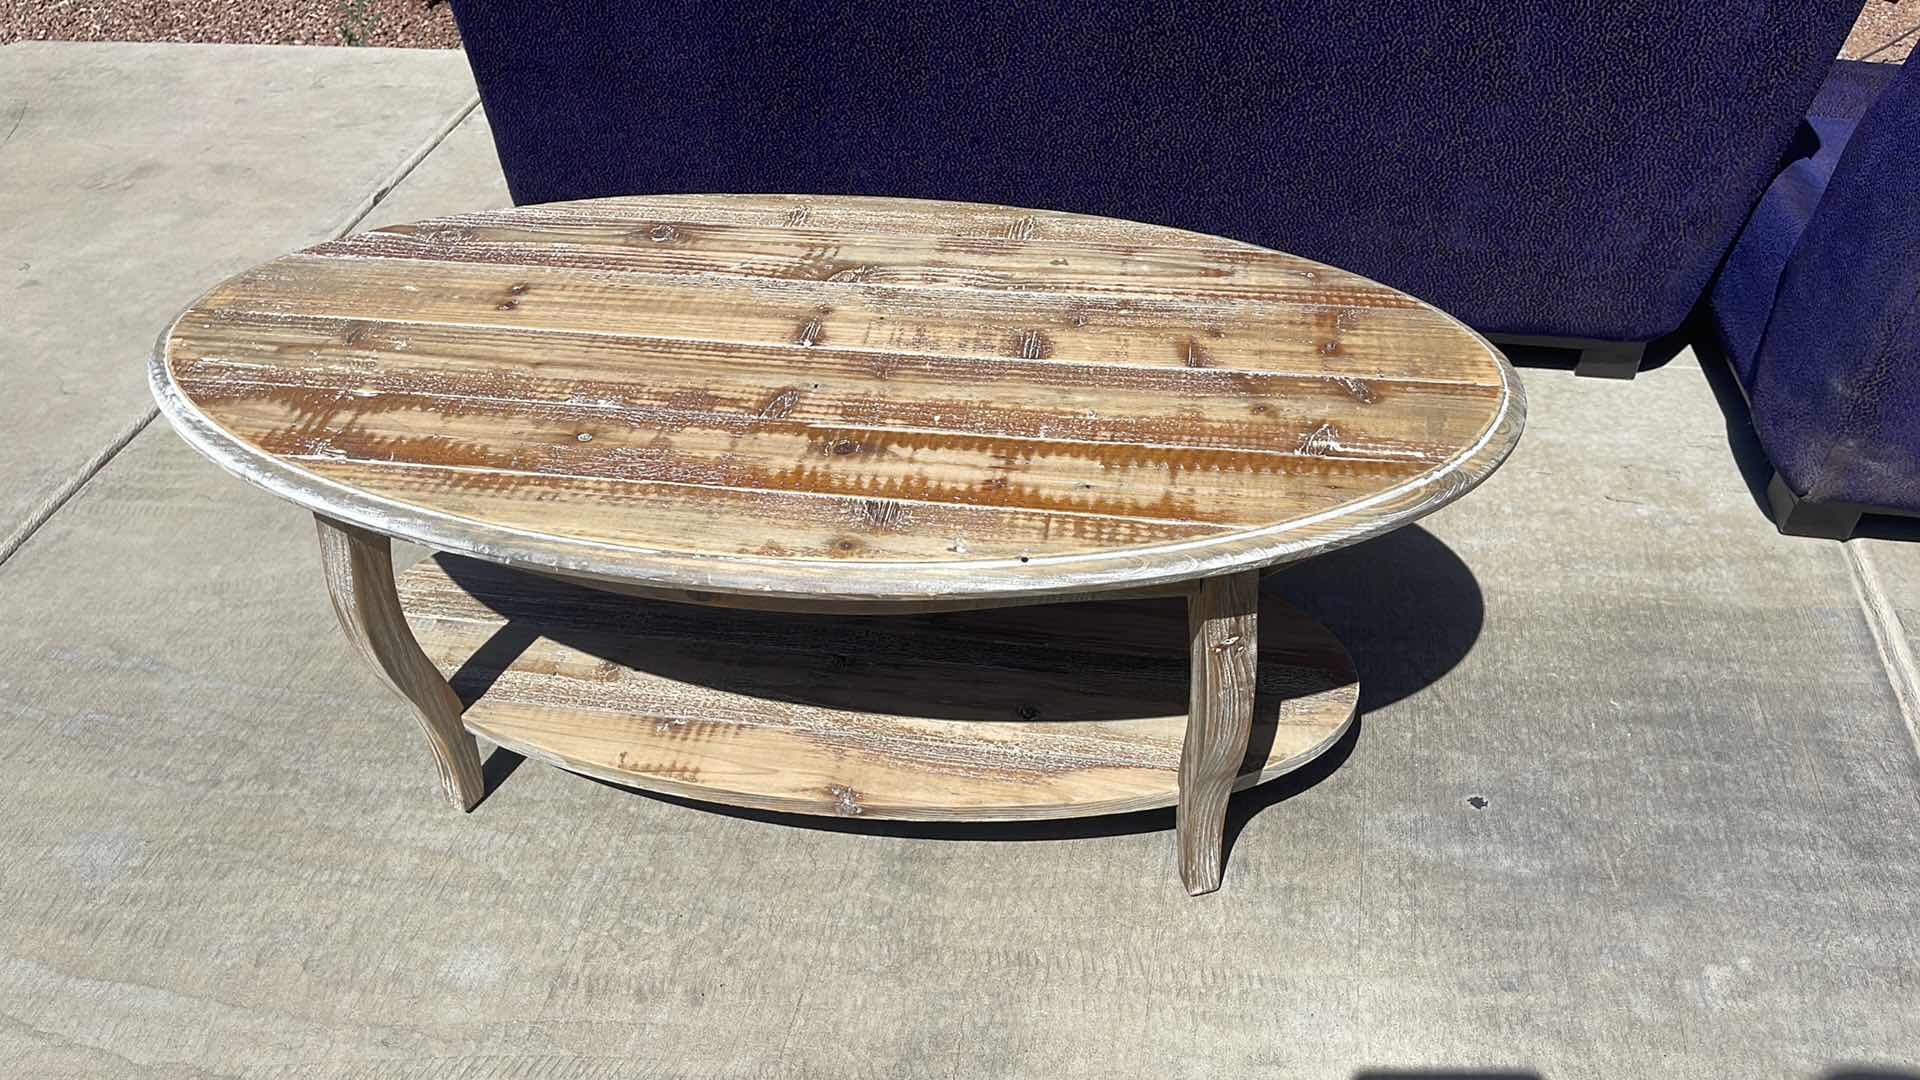 Photo 1 of RUSTIC WOOD BASE COFFEE TABLE 48” X 24” 19”